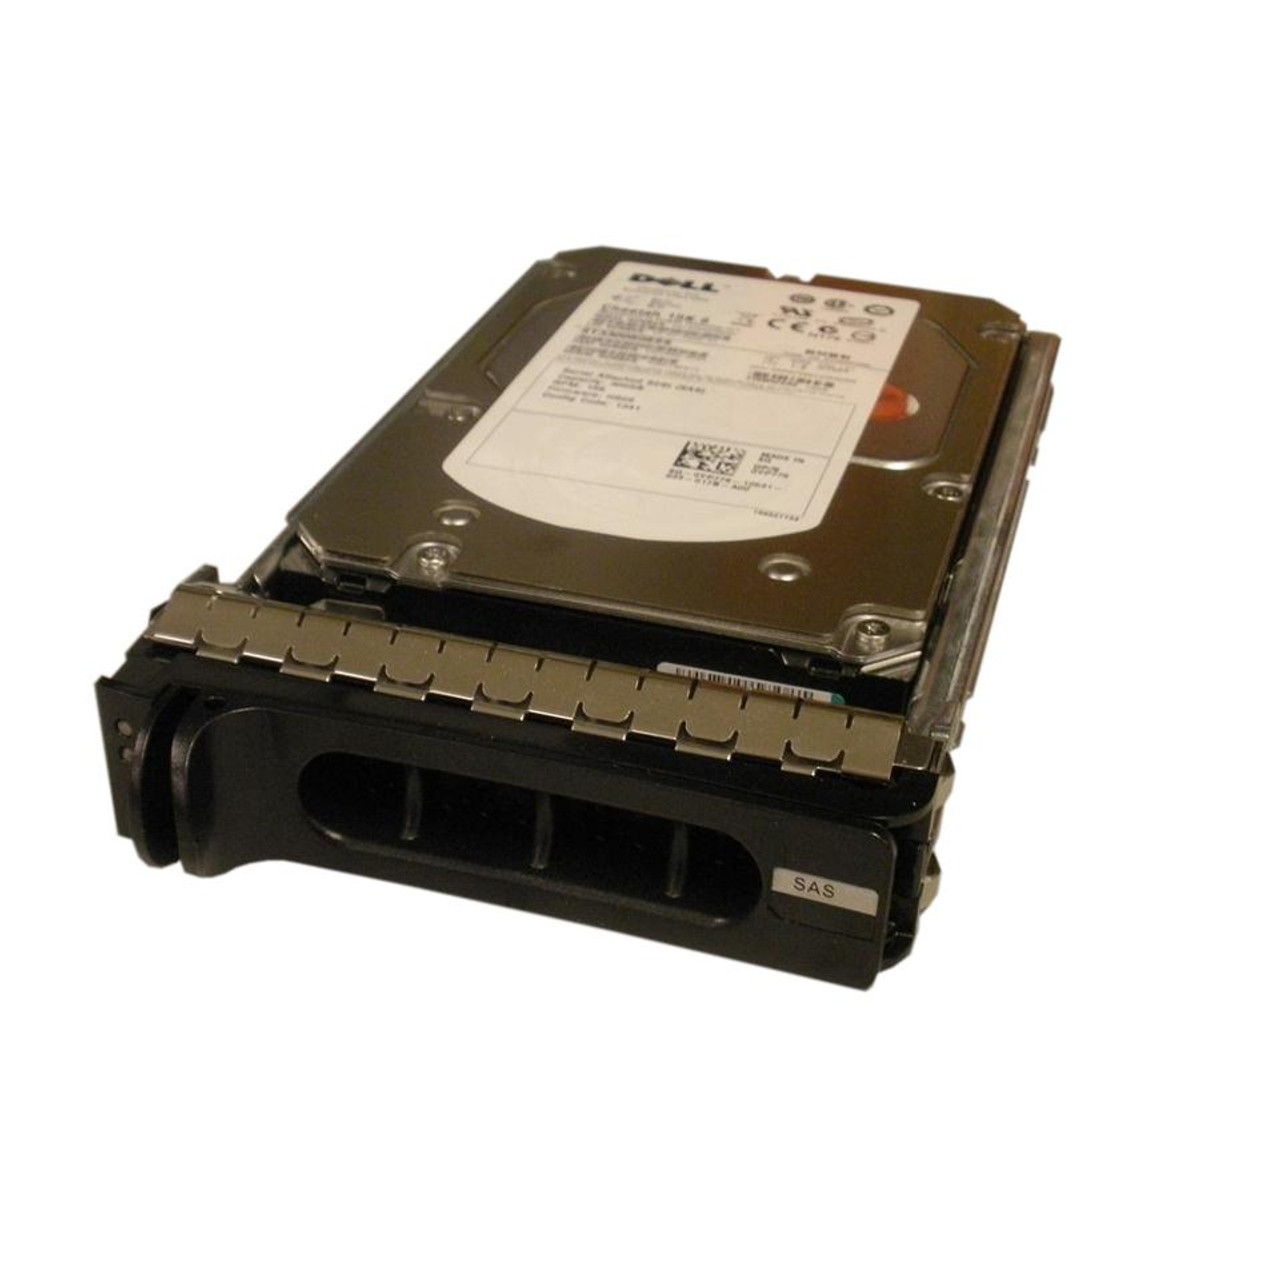 341-2828 - Dell 300GB 10000RPM 16MB Cache SAS 3GB/s 3.5-inch Low Profile Hard Drive with Tray for PowerEdge and PowerVault Server